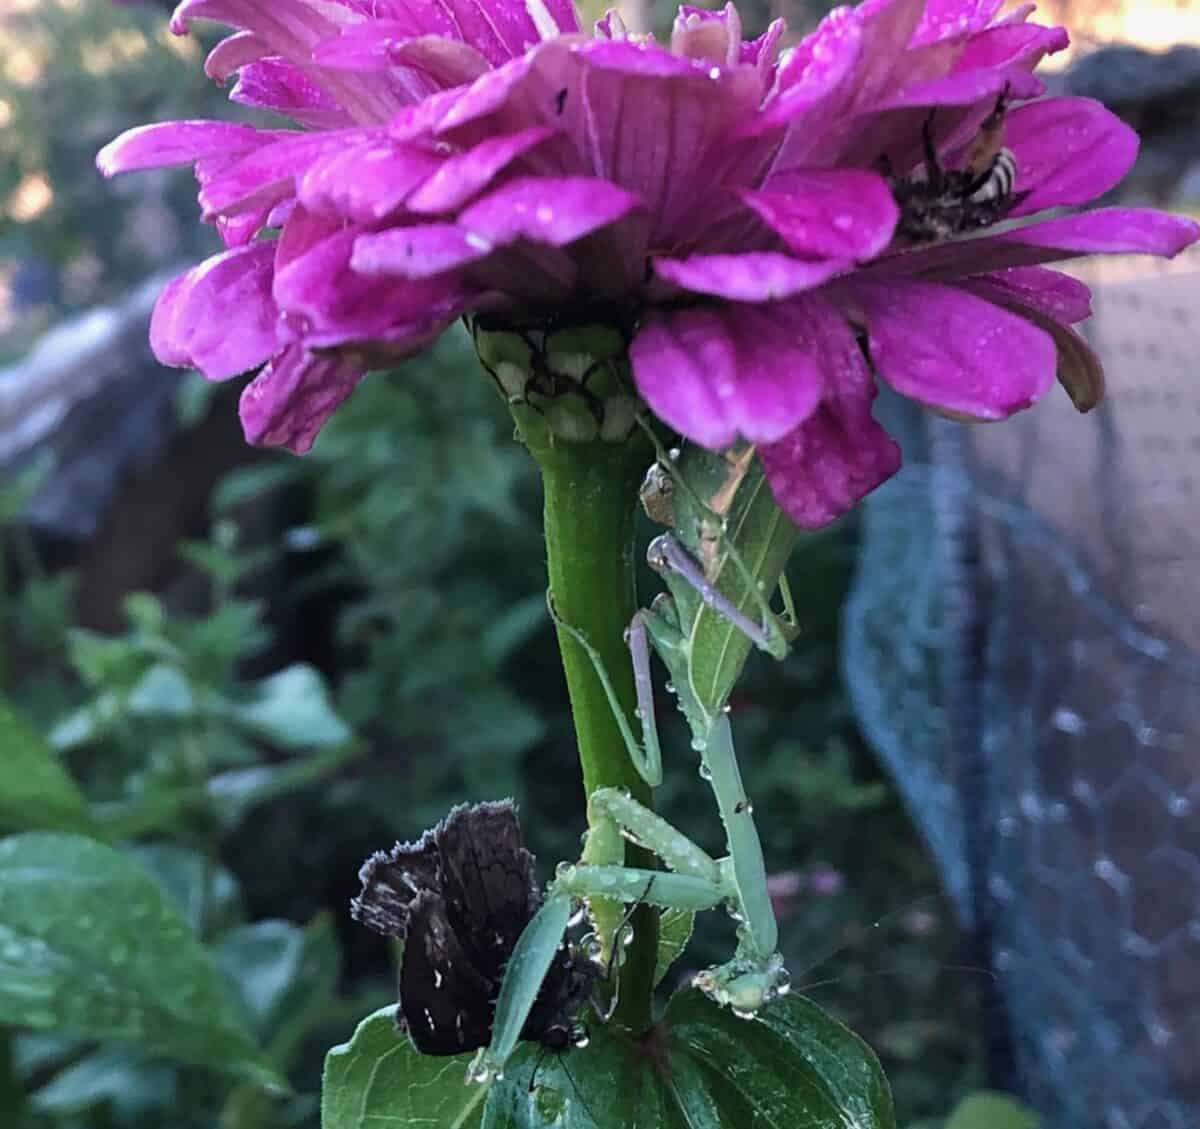 Upside down green praying mantis eating a butterfly.